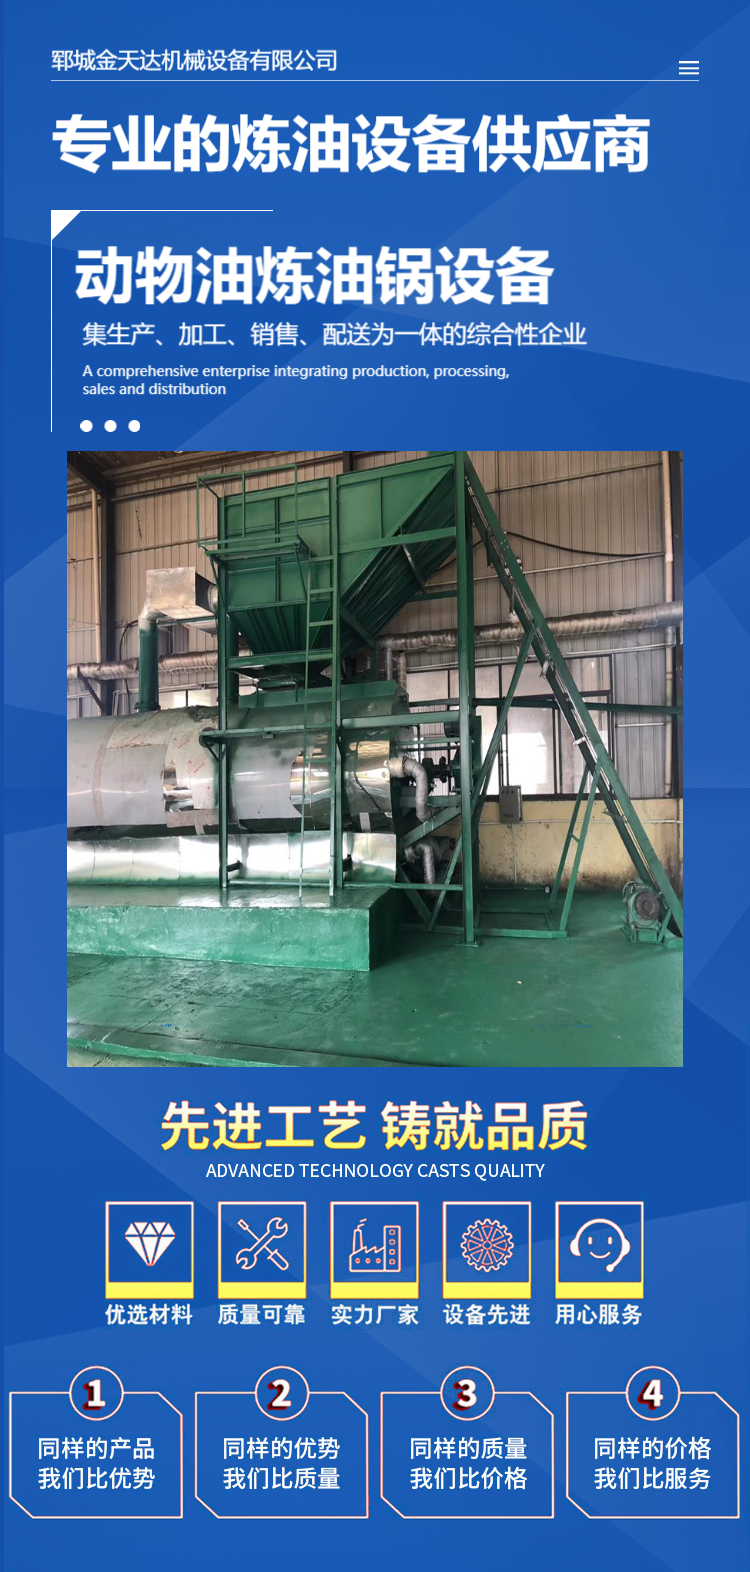 Jintianda 10 ton thermal oil refining boiler plate material - easy to understand operation